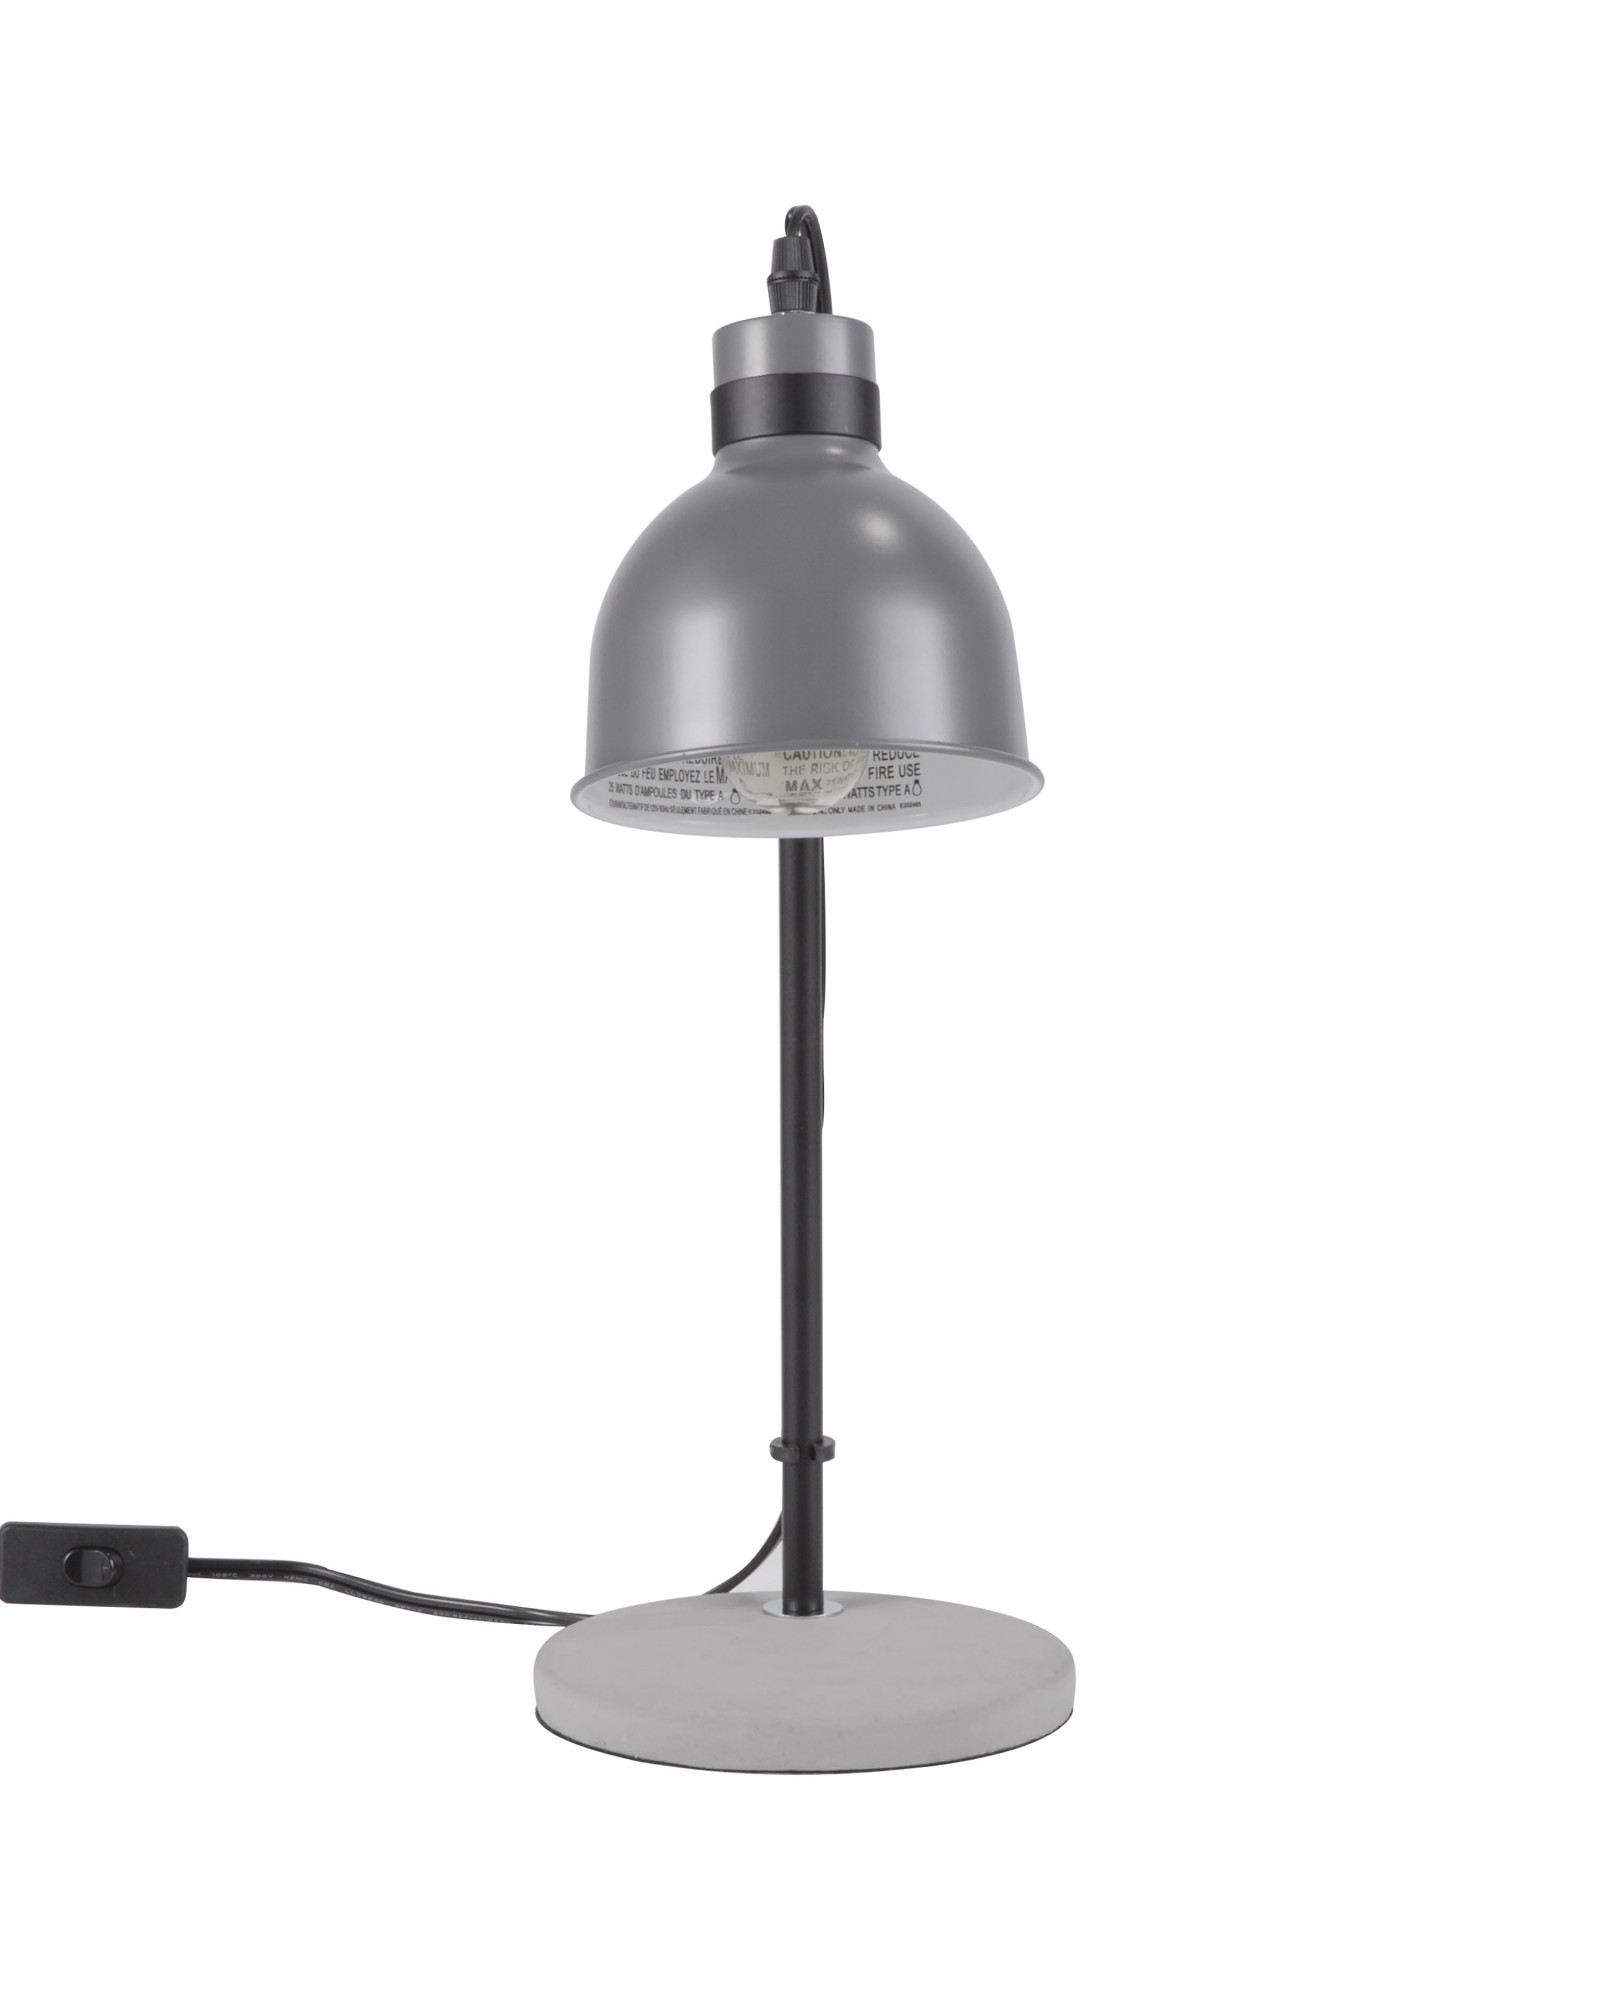 Concrete Industrial Table Lamp in Black and Grey